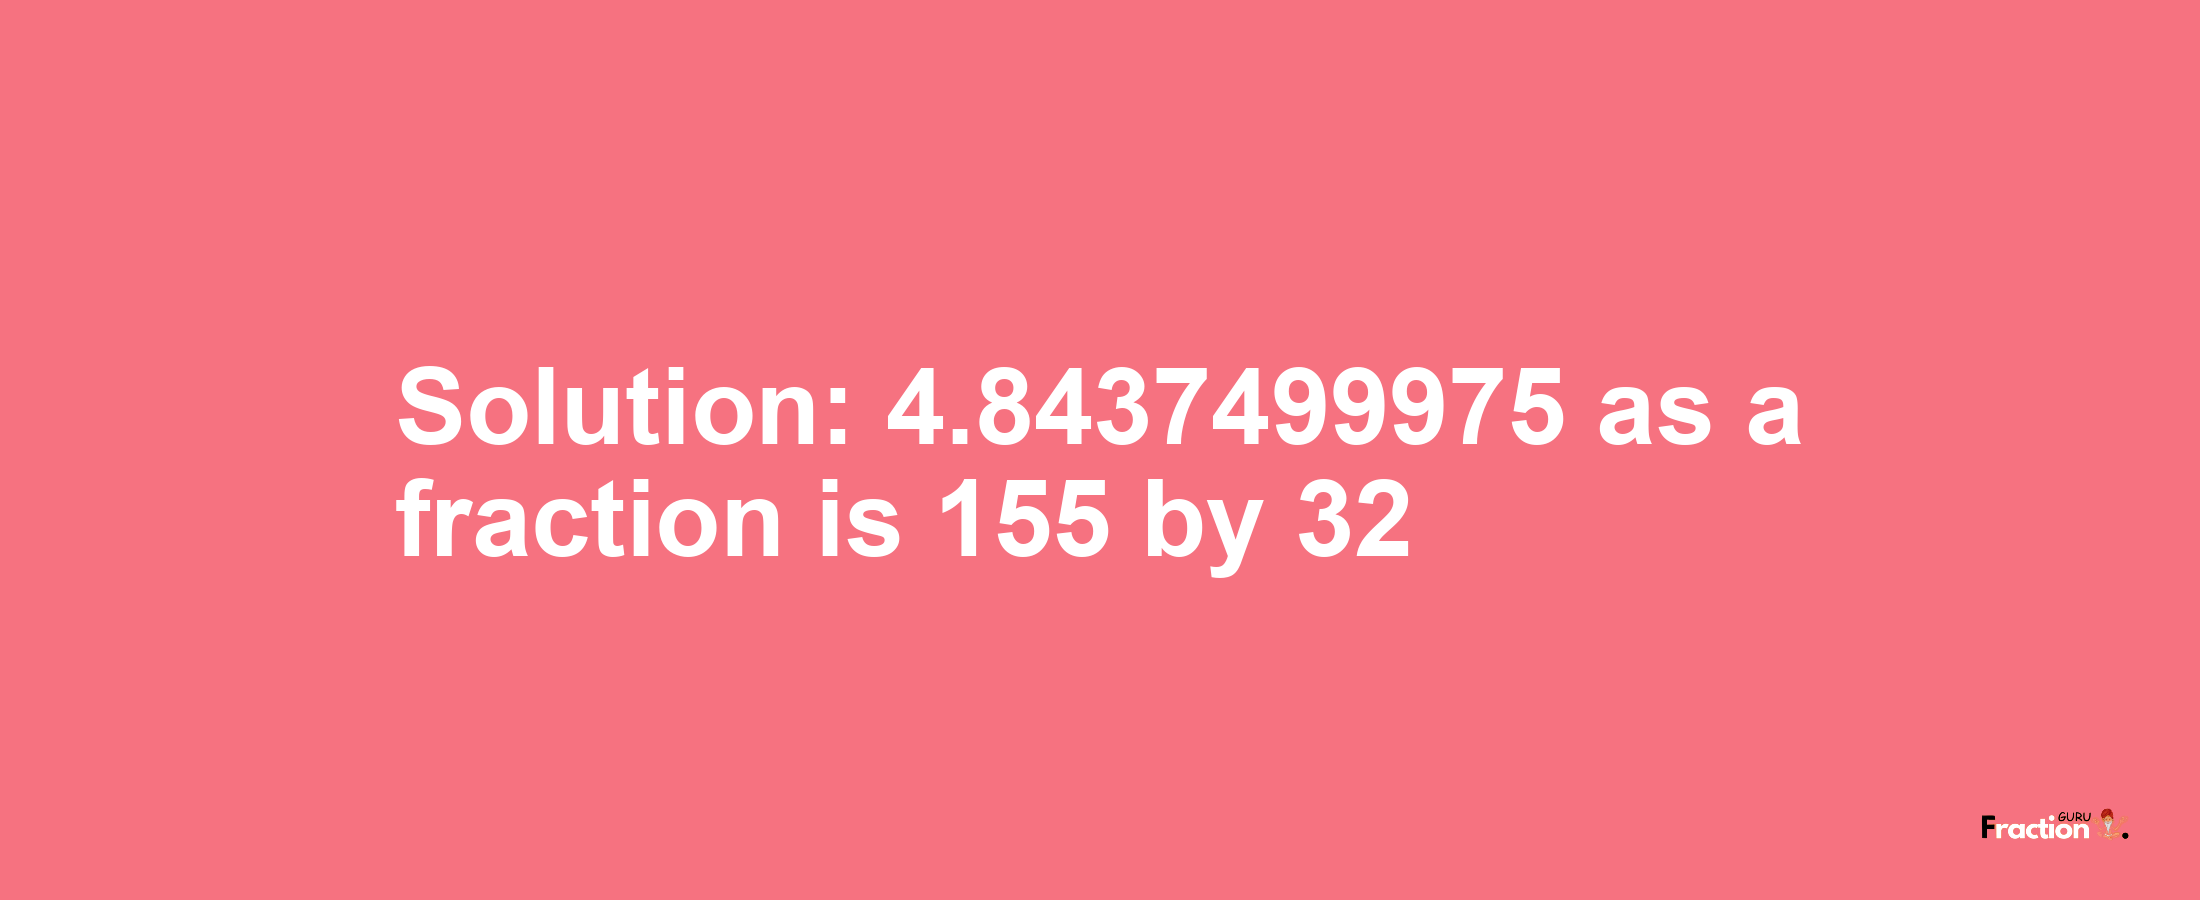 Solution:4.8437499975 as a fraction is 155/32